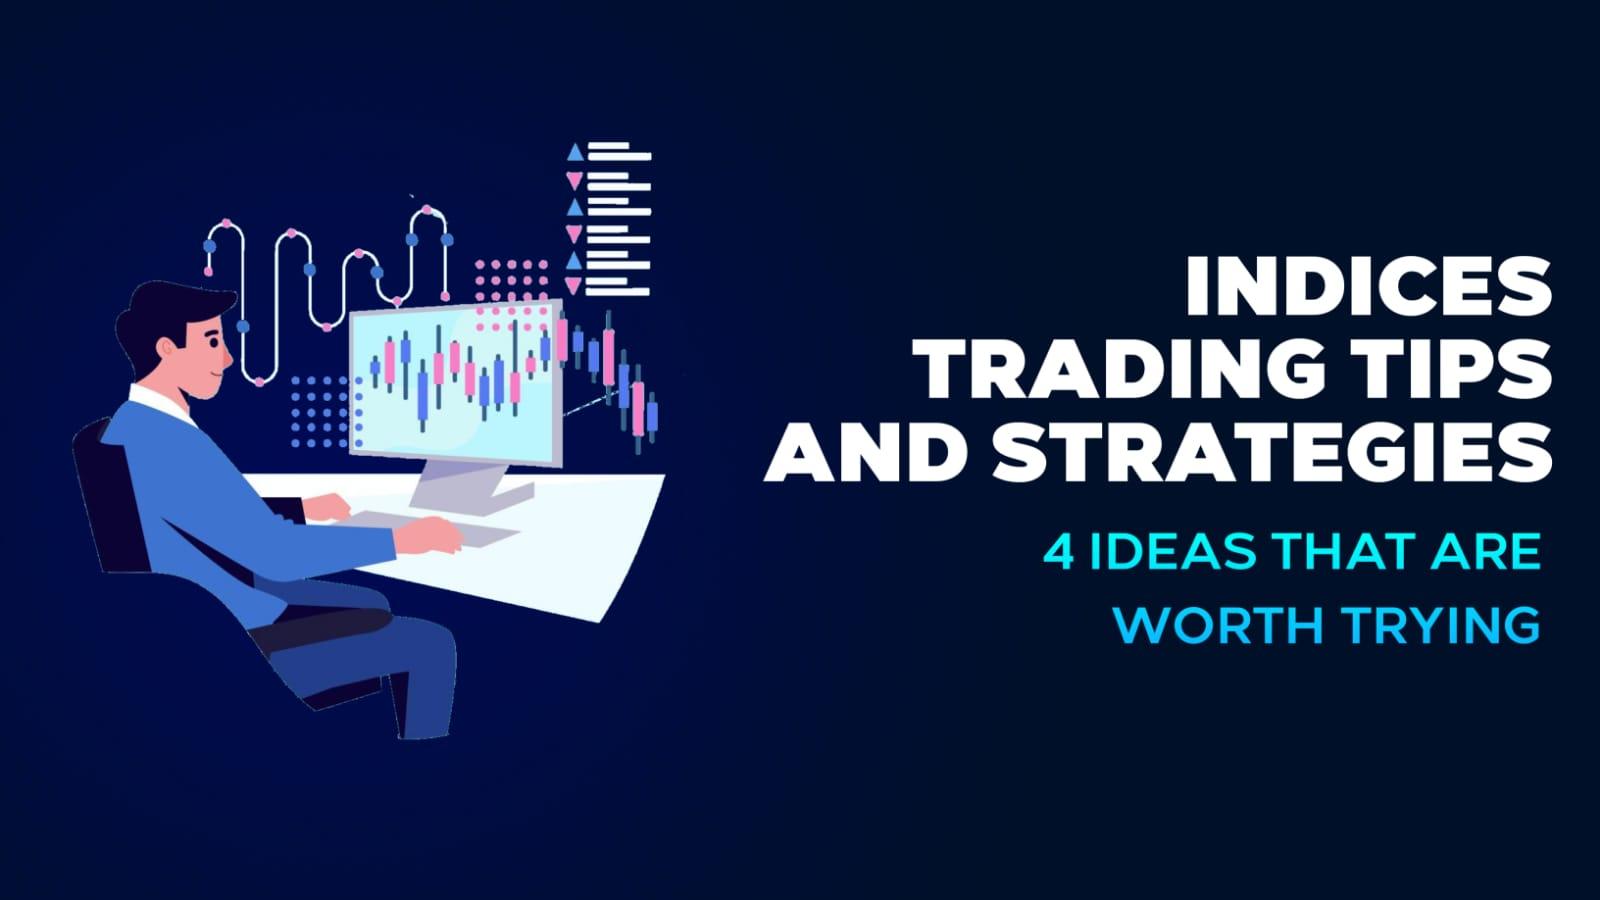 Indices Trading Tips And Strategies – 4 Ideas That Are Worth Trying